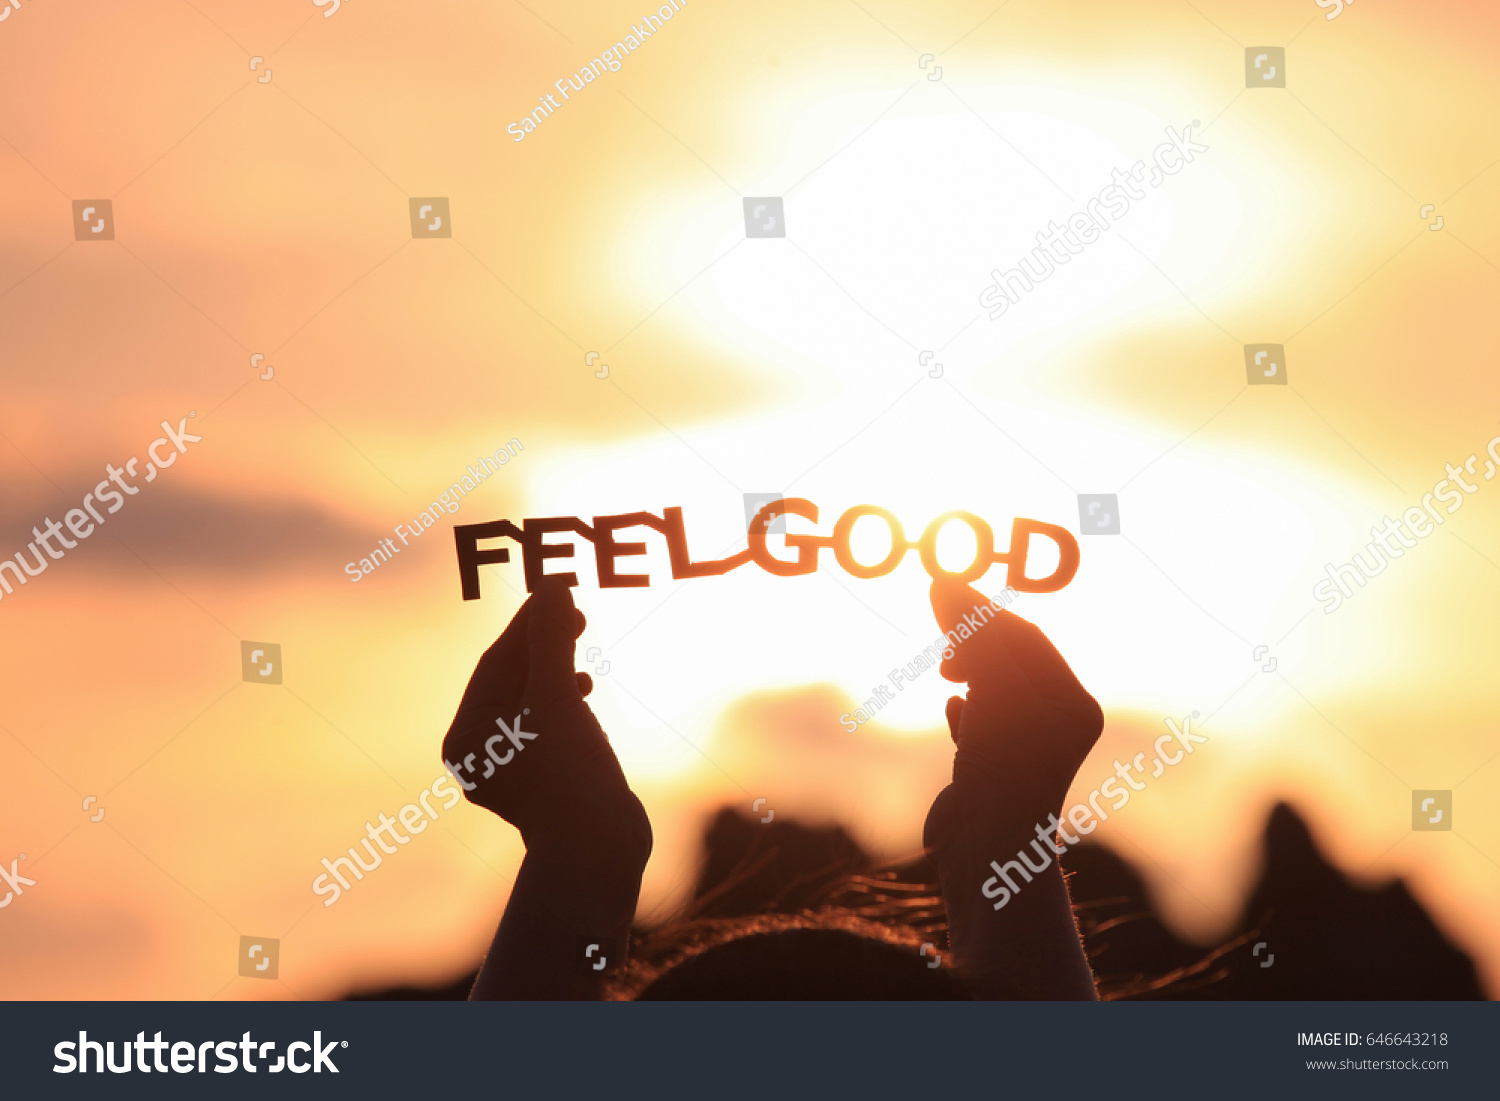 FEEL GOOD text in hands on the sunset sky #646643218